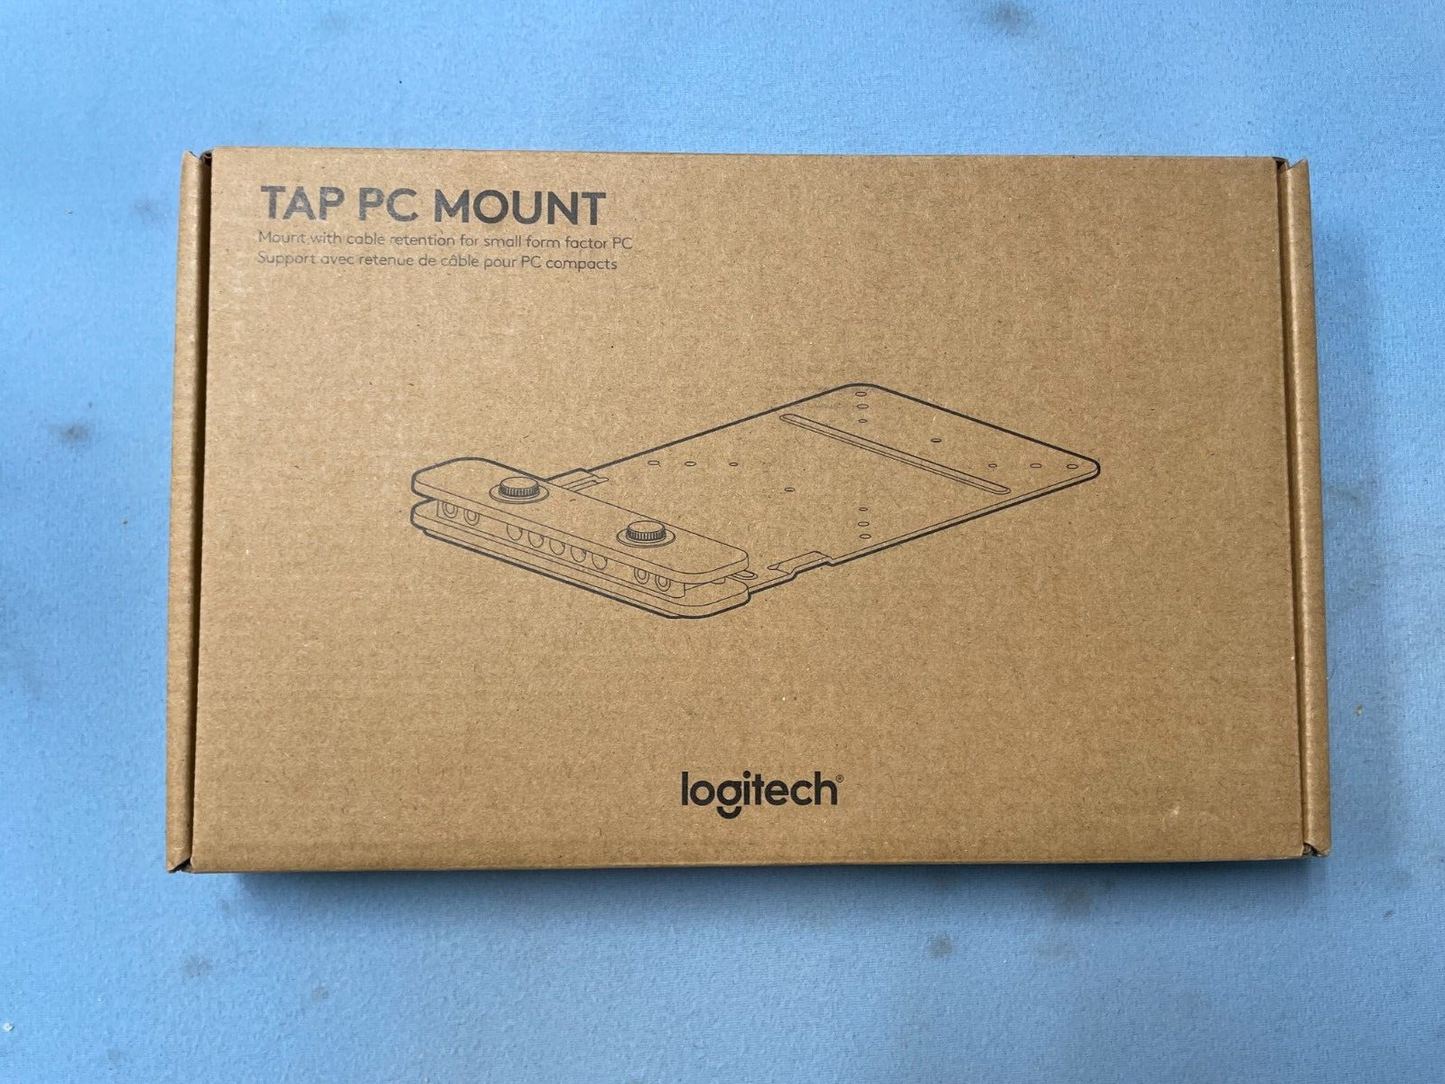 Logitech Tap PC Mount for Small Form Factor 60939-001825